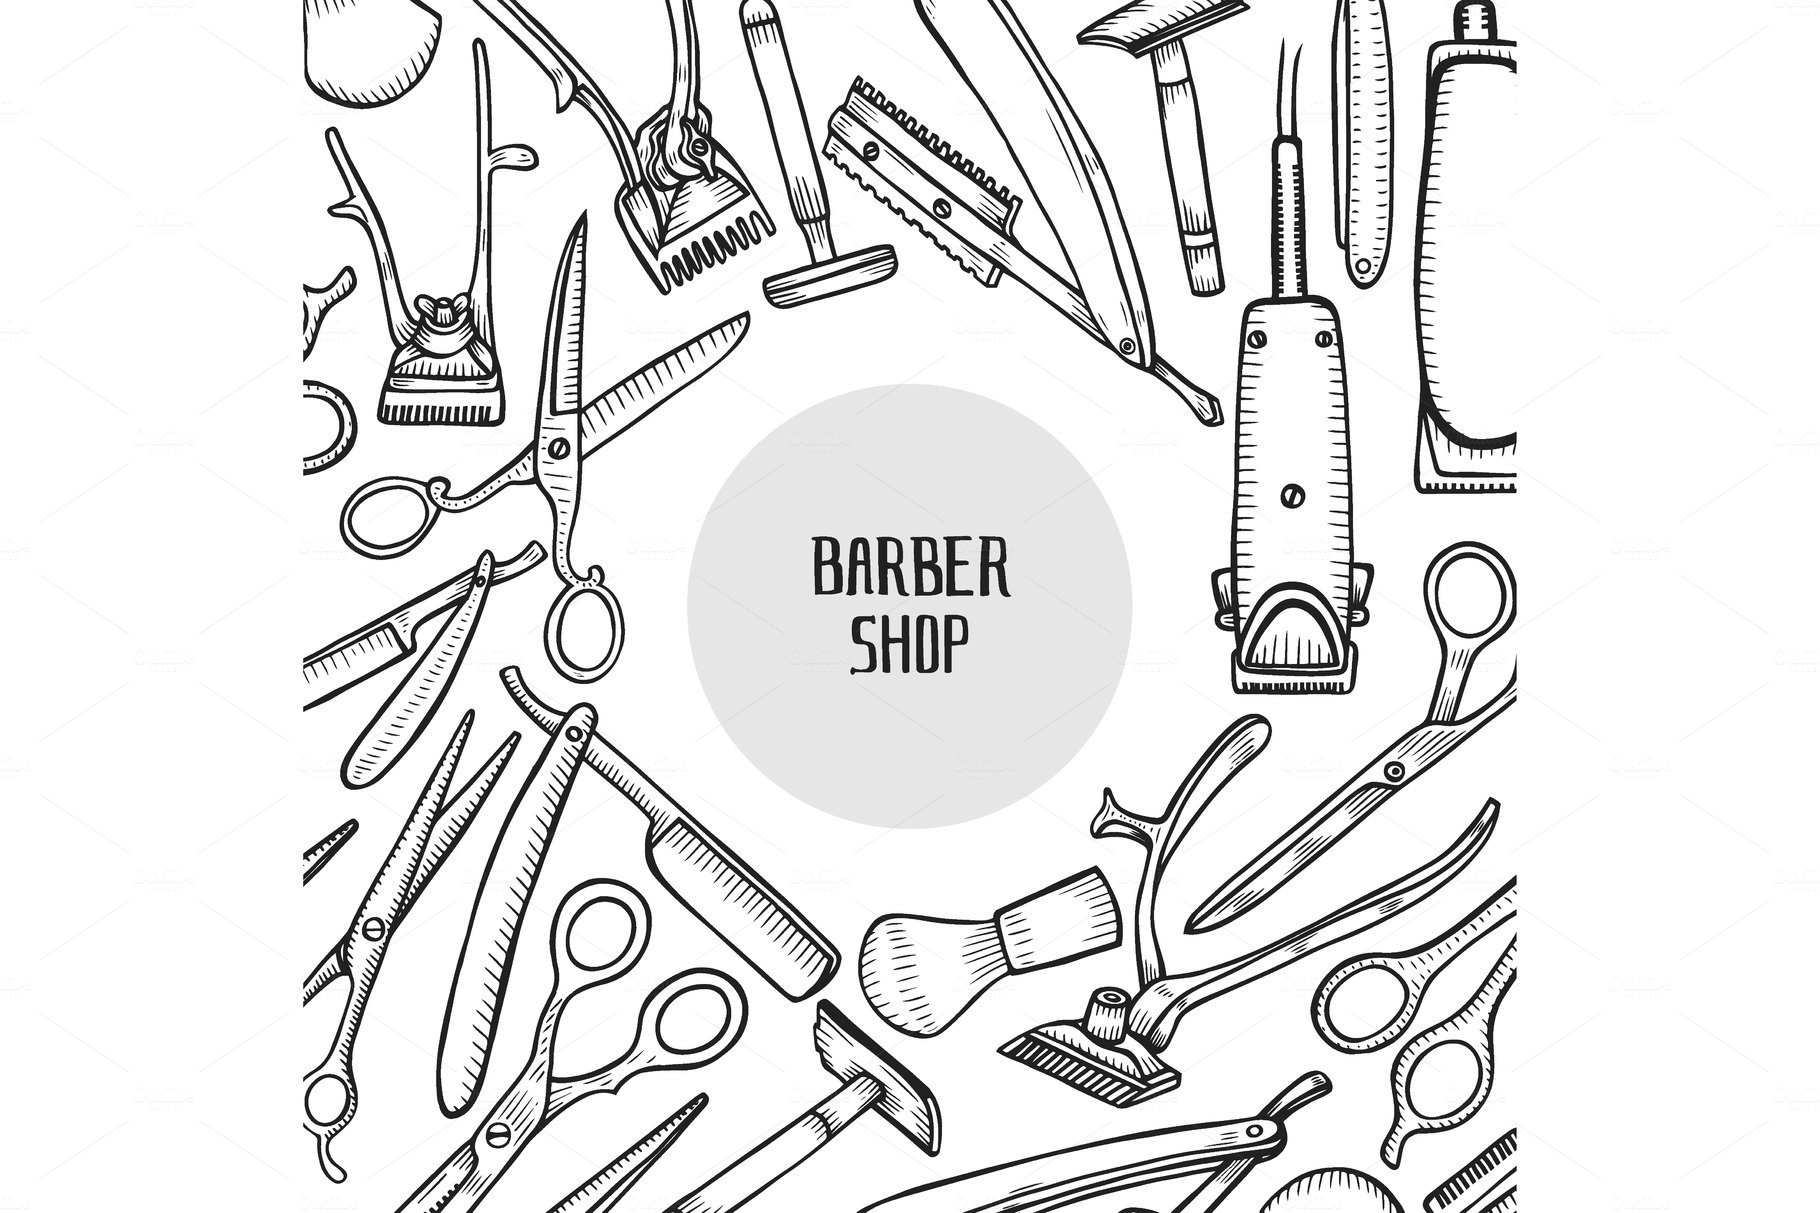 hairdressers professional tools cover image.